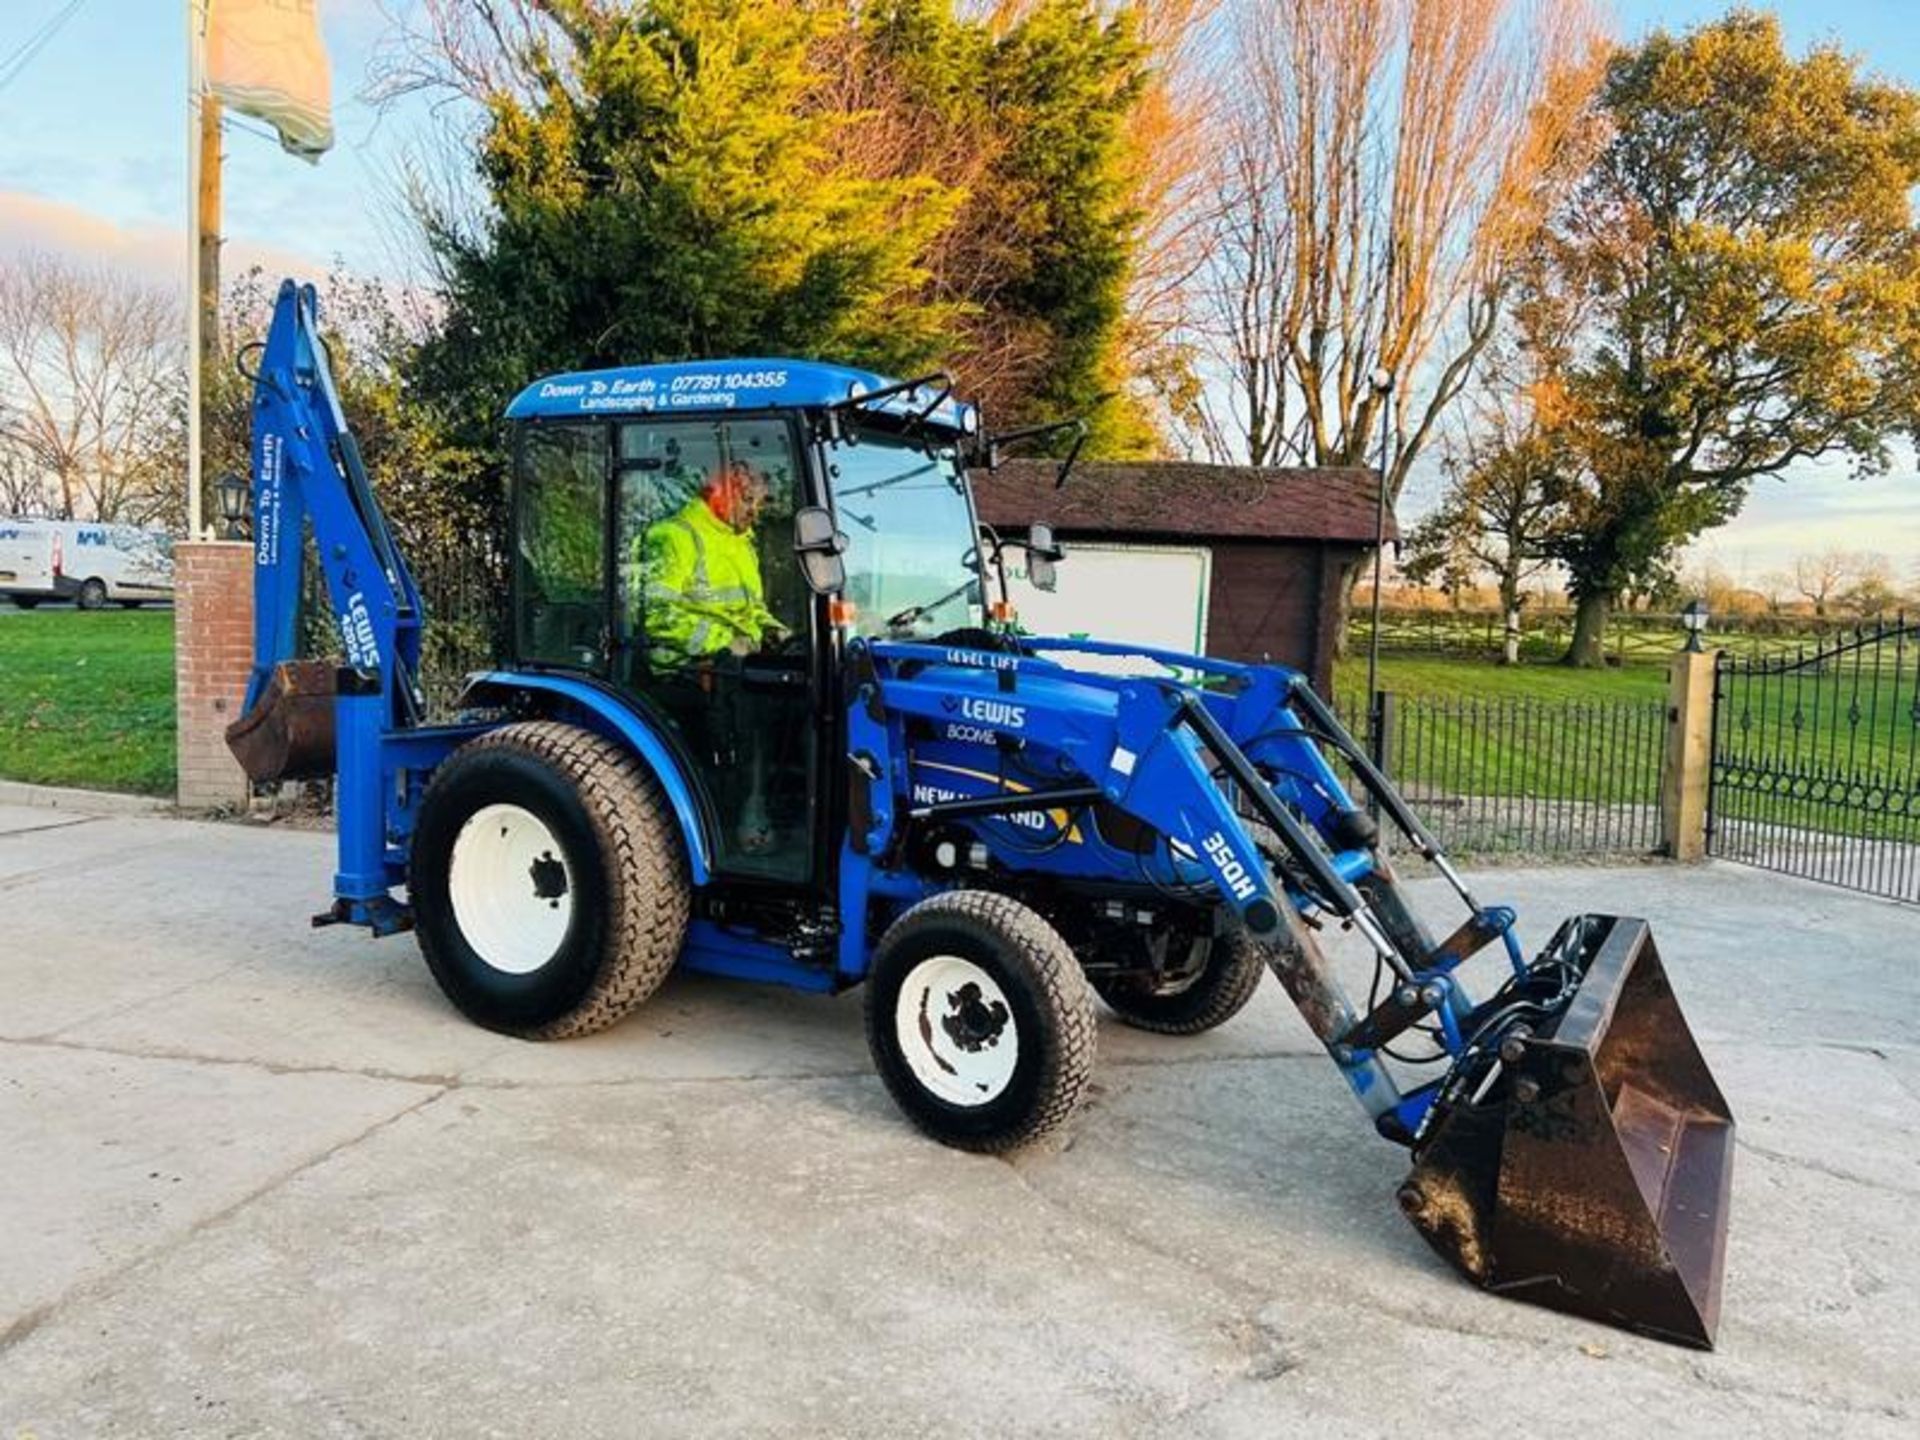 NEW HOLLAND BOOMER 40 4WD TRACTOR *YEAR 2014, ONLY 737 HRS* C/W LOADER & BACK TACTOR - Image 9 of 19